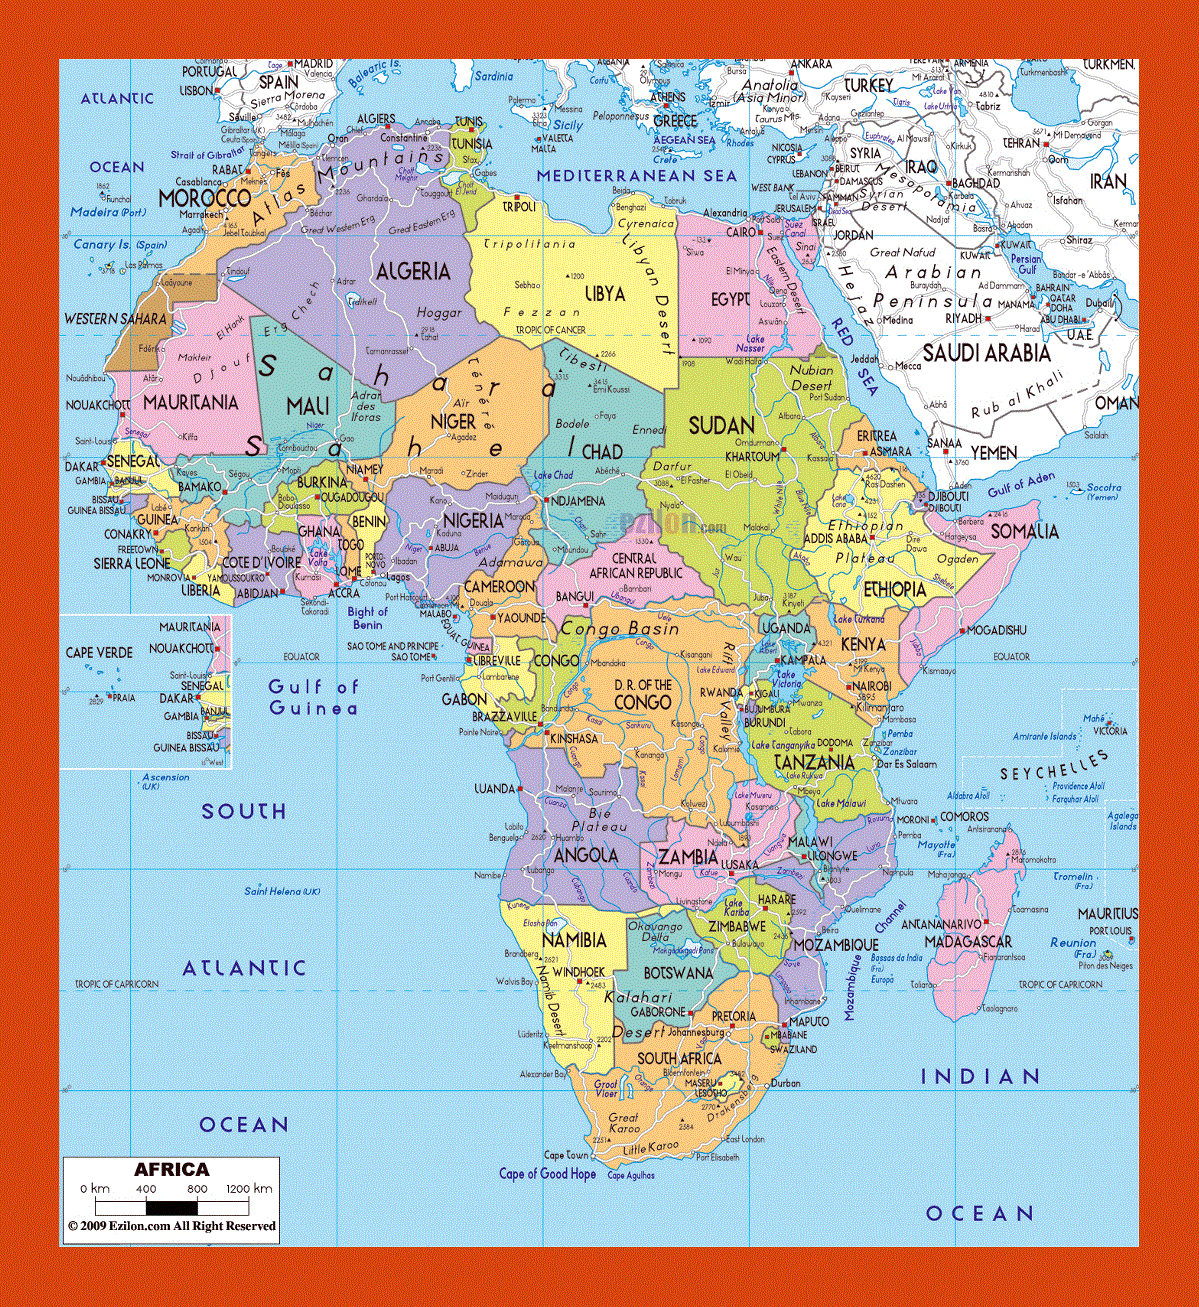 Political map of Africa